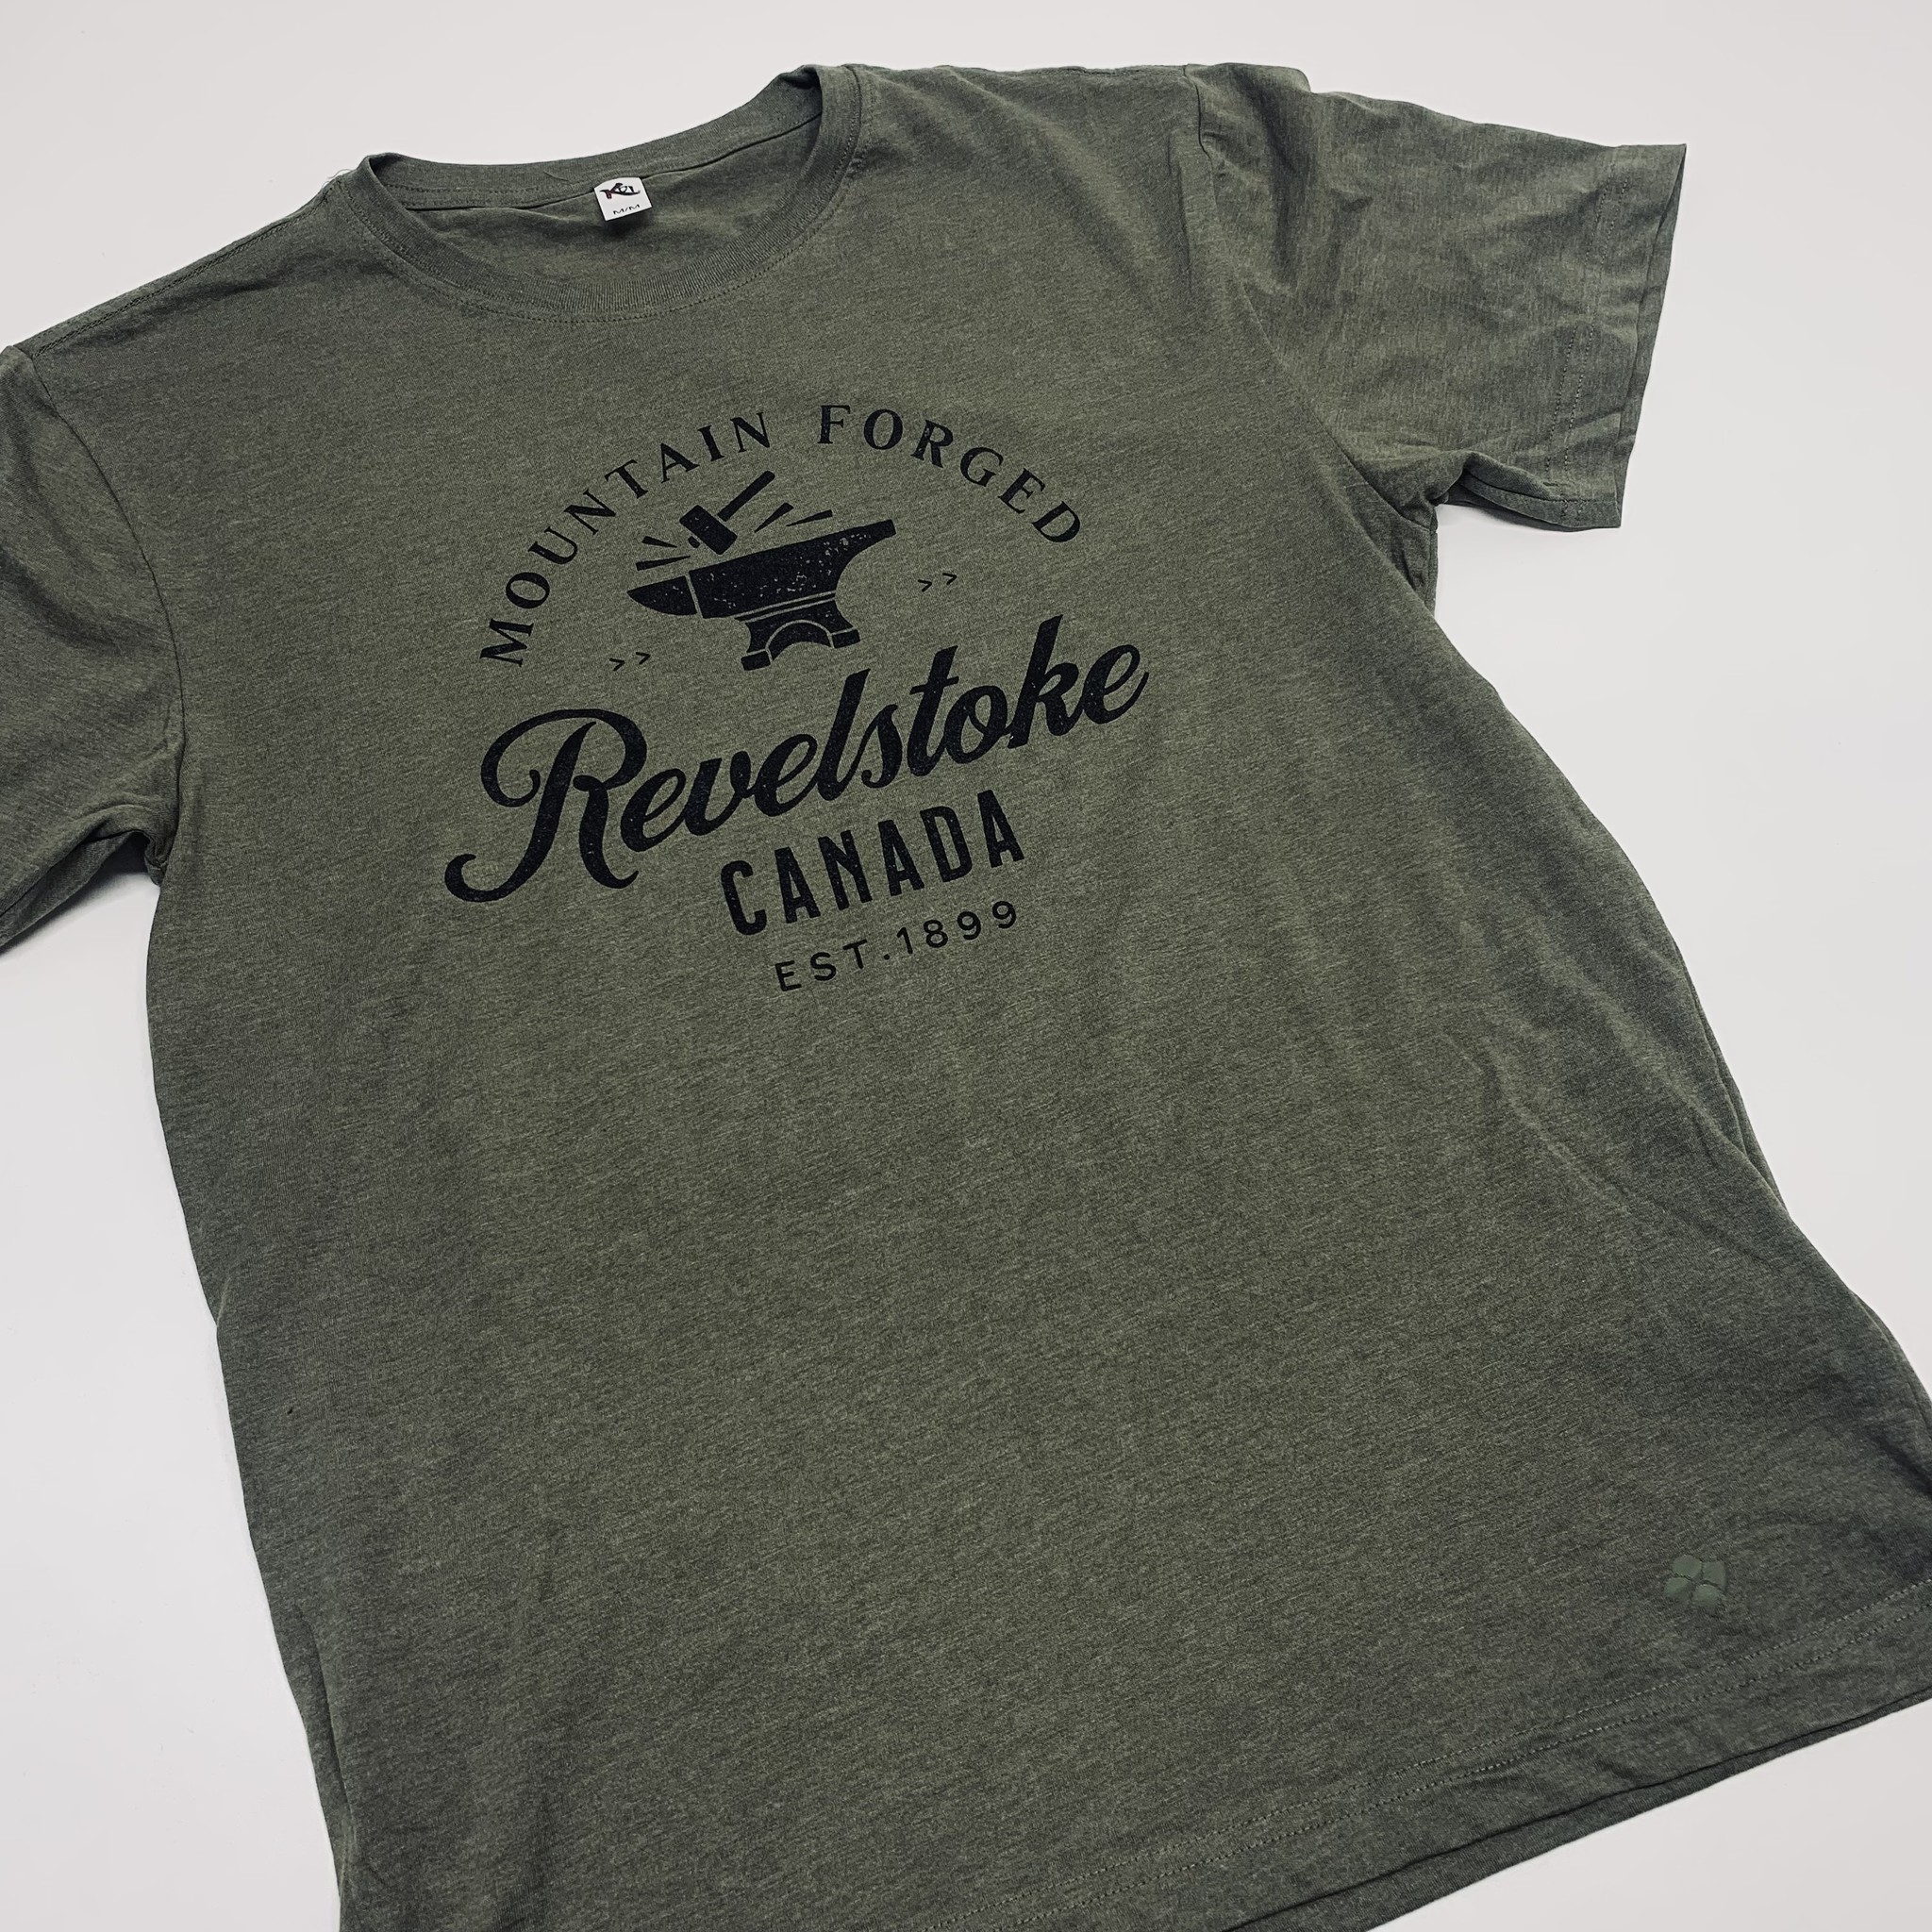 Trading Co. Revelstoke - Mountain Forged Tee